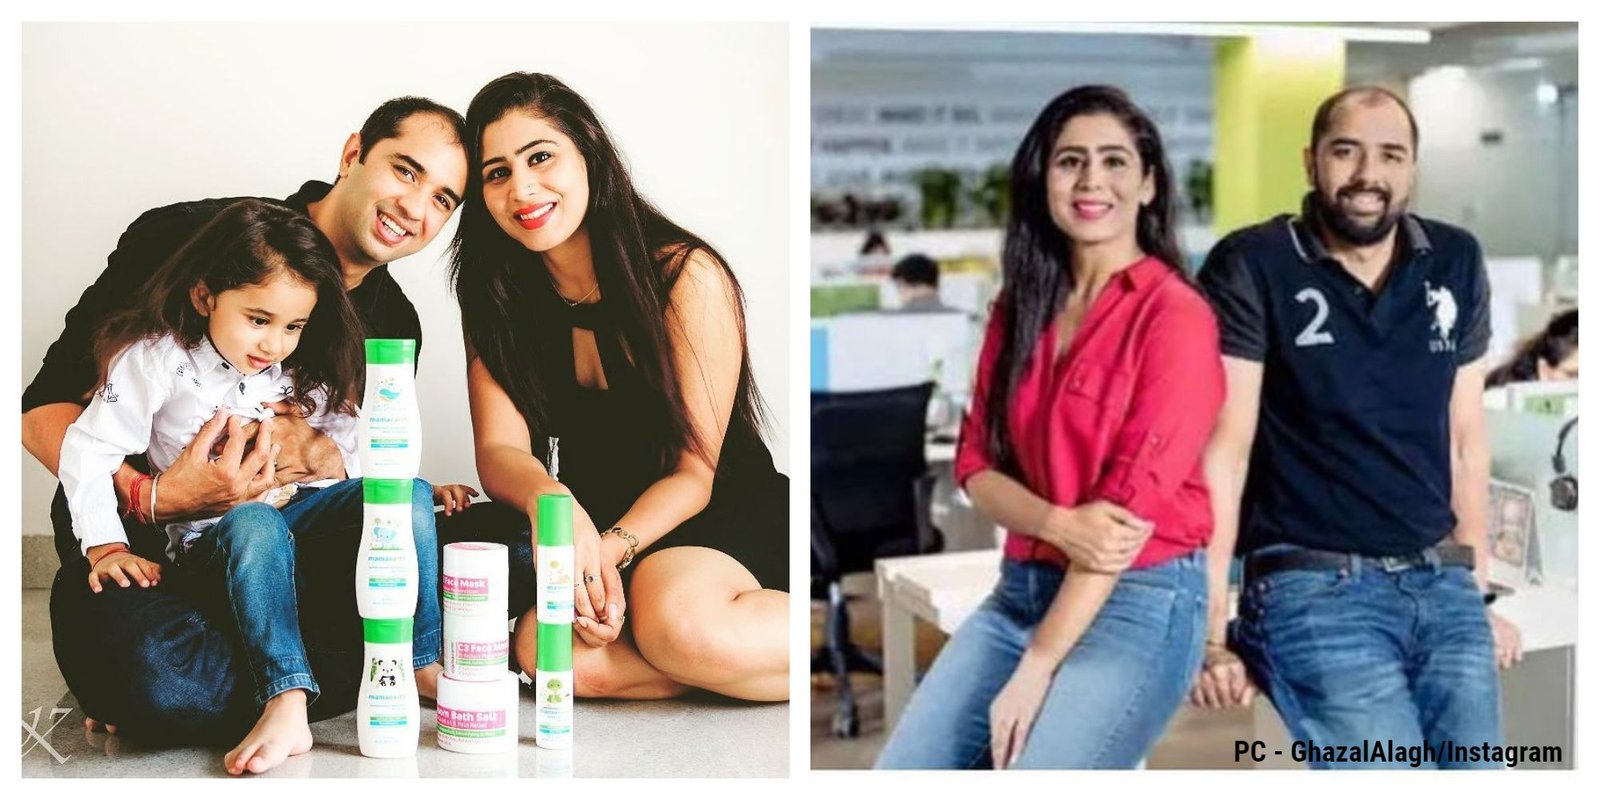 MamaEarth’s Inspiring Story, From Facing Failures To Going Unicorn, India’s First Toxin Free Beauty Brand